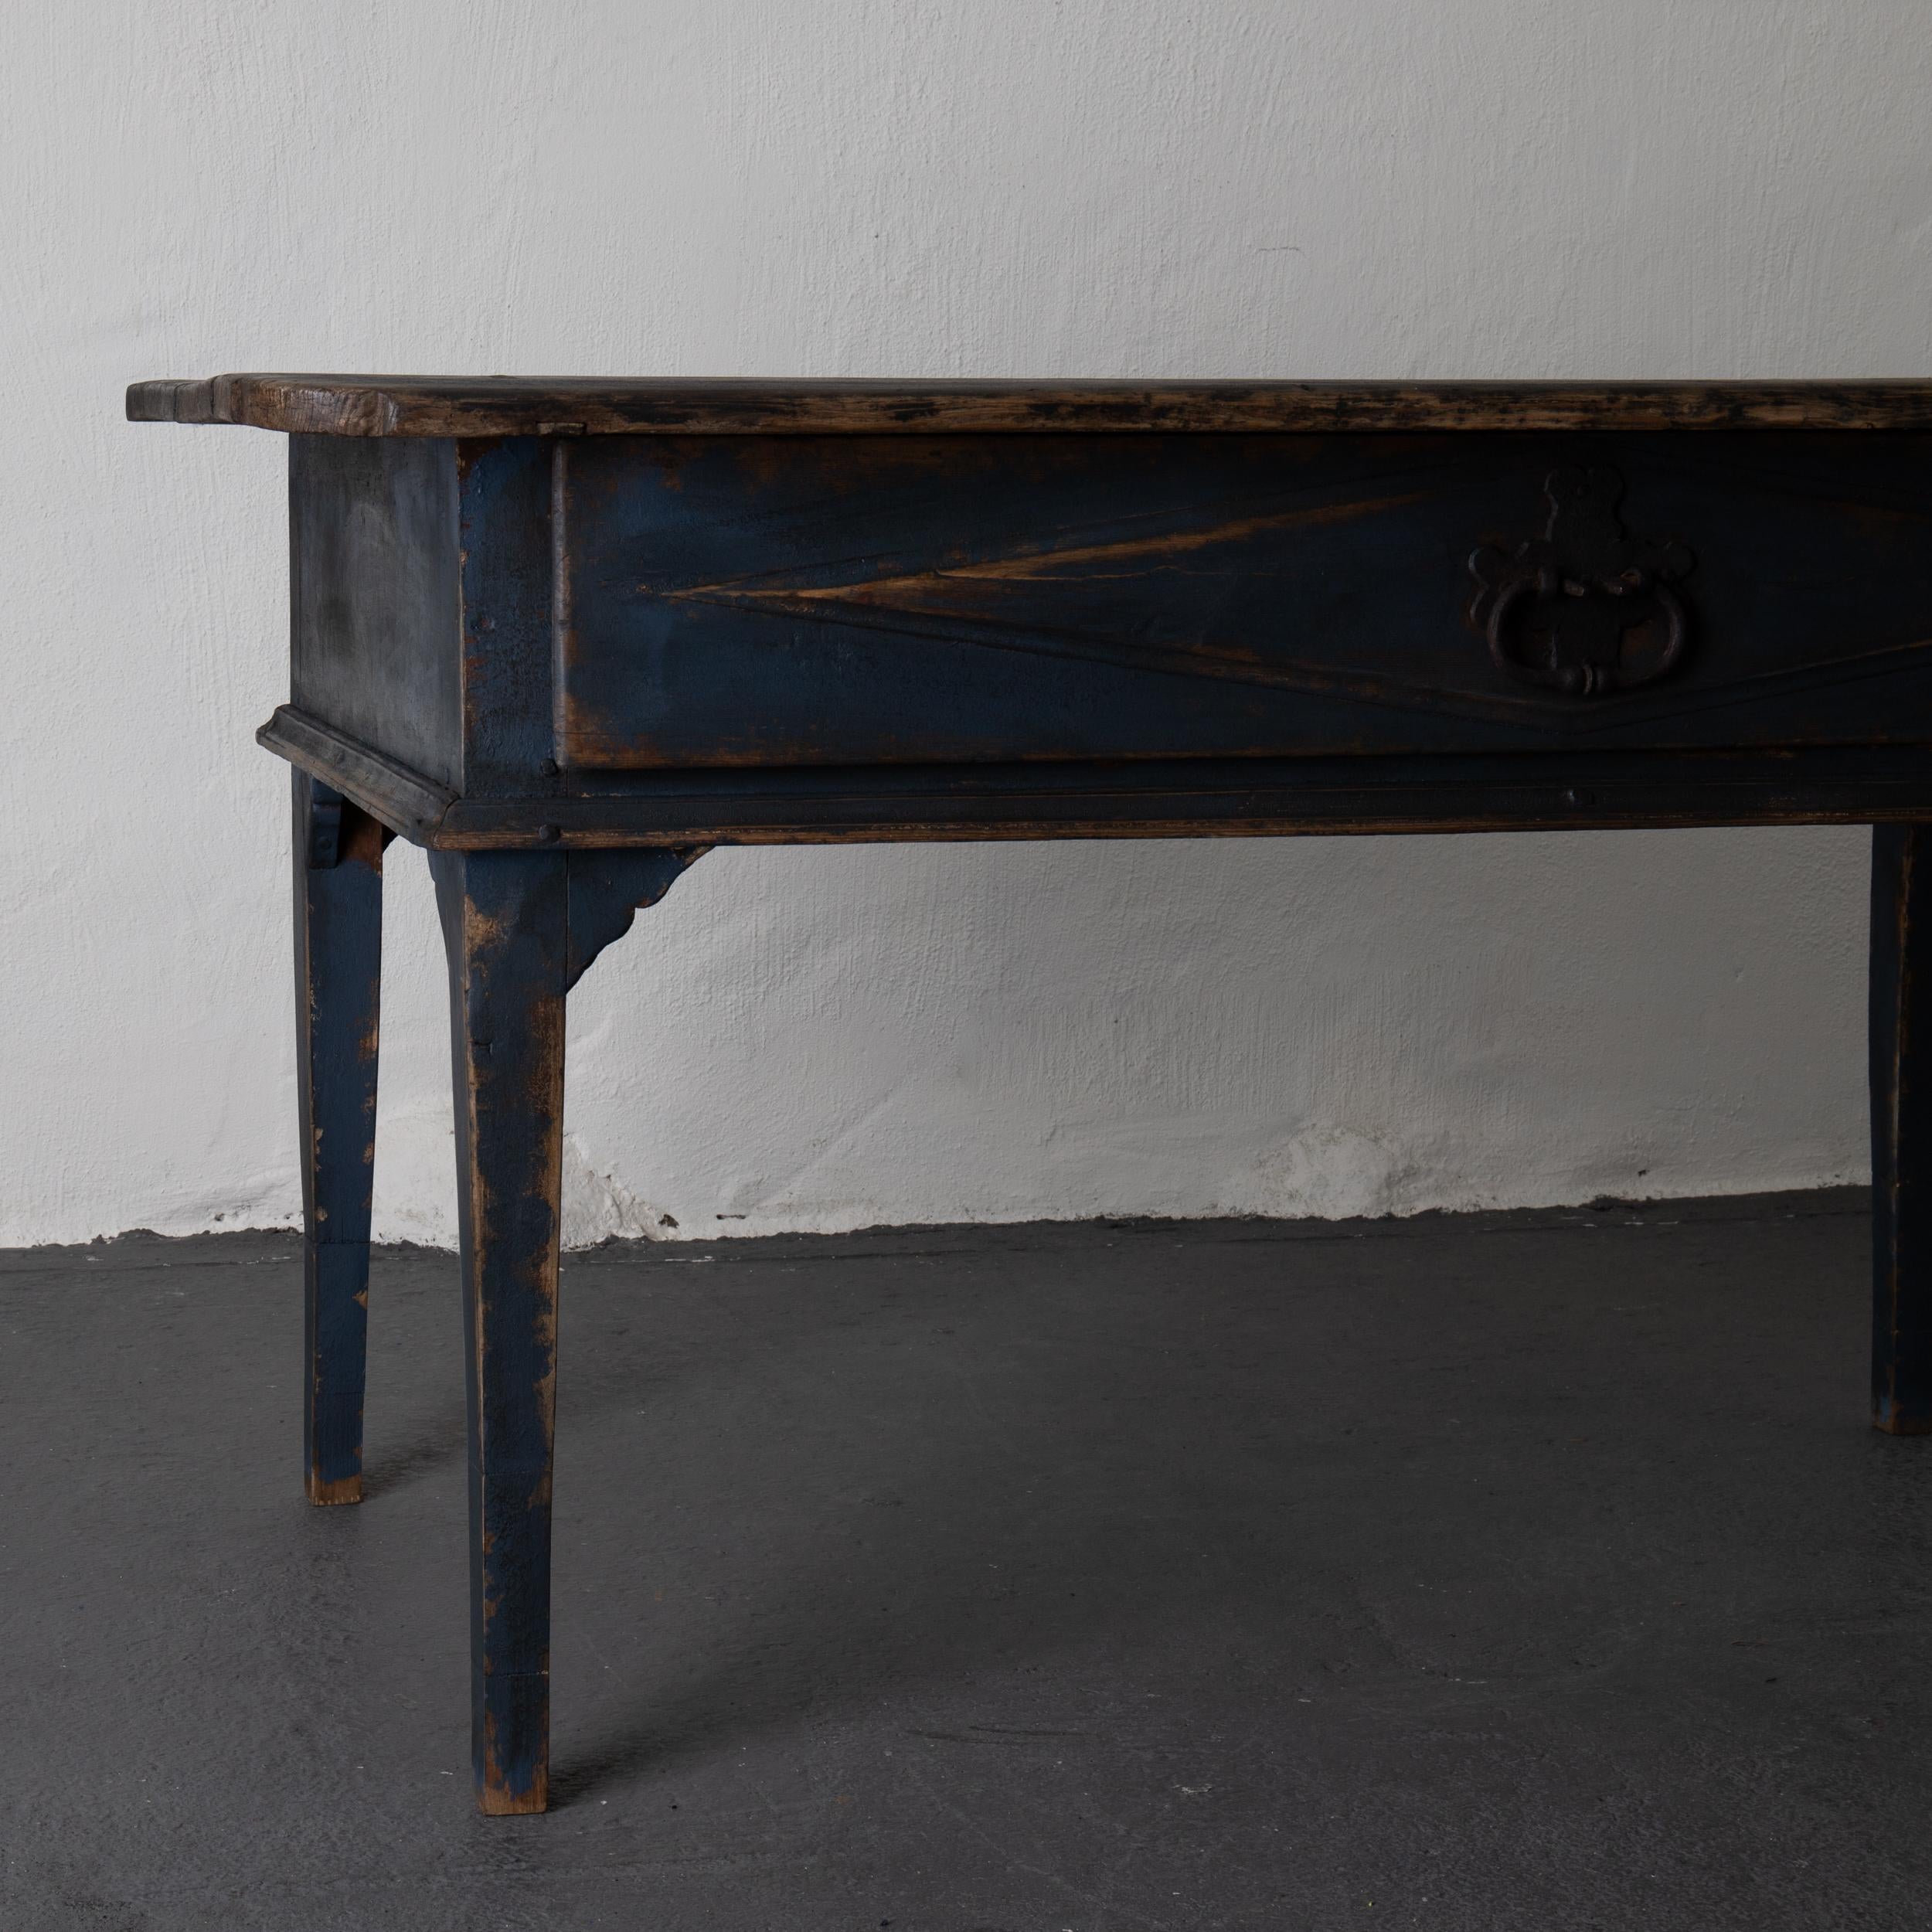 Table Swedish black blue, 19th century, Sweden. A table made during the early 19th century in Sweden. Painted with Laserow black on the top and a deep dark blue base. Carved drawer with diamond shapes in frieze. Original cast iron hardware. Tapered